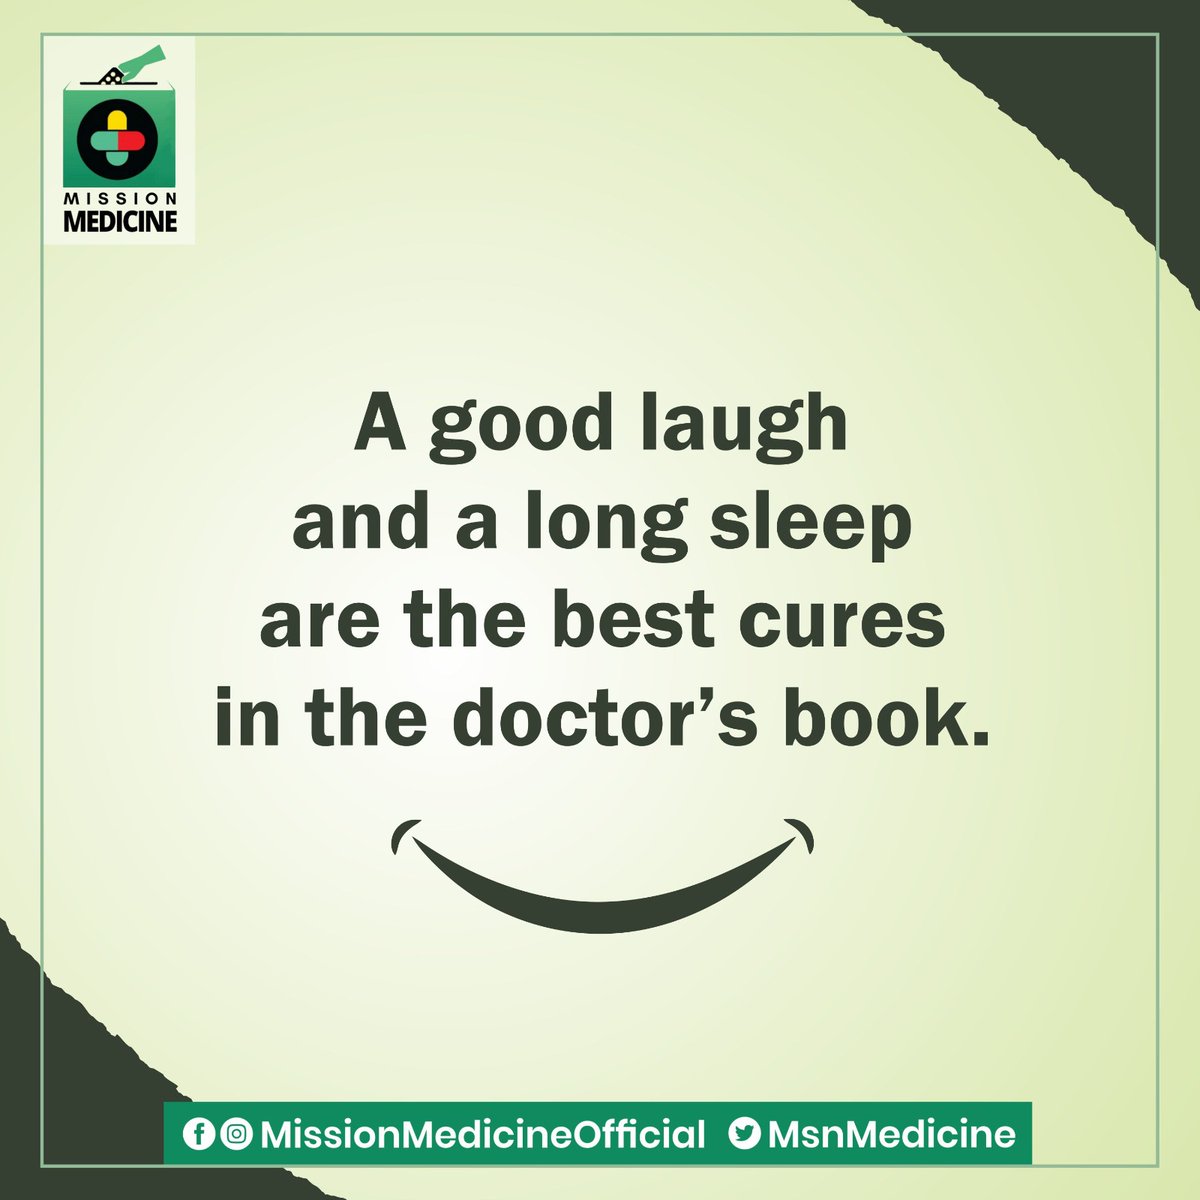 A good laugh
and a long sleep
are the best cures
in the doctor’s book.
#MissionMedicine
#HealthyNation_HappyNation
#ManavDharam
#ManavUtthanSewaSamiti